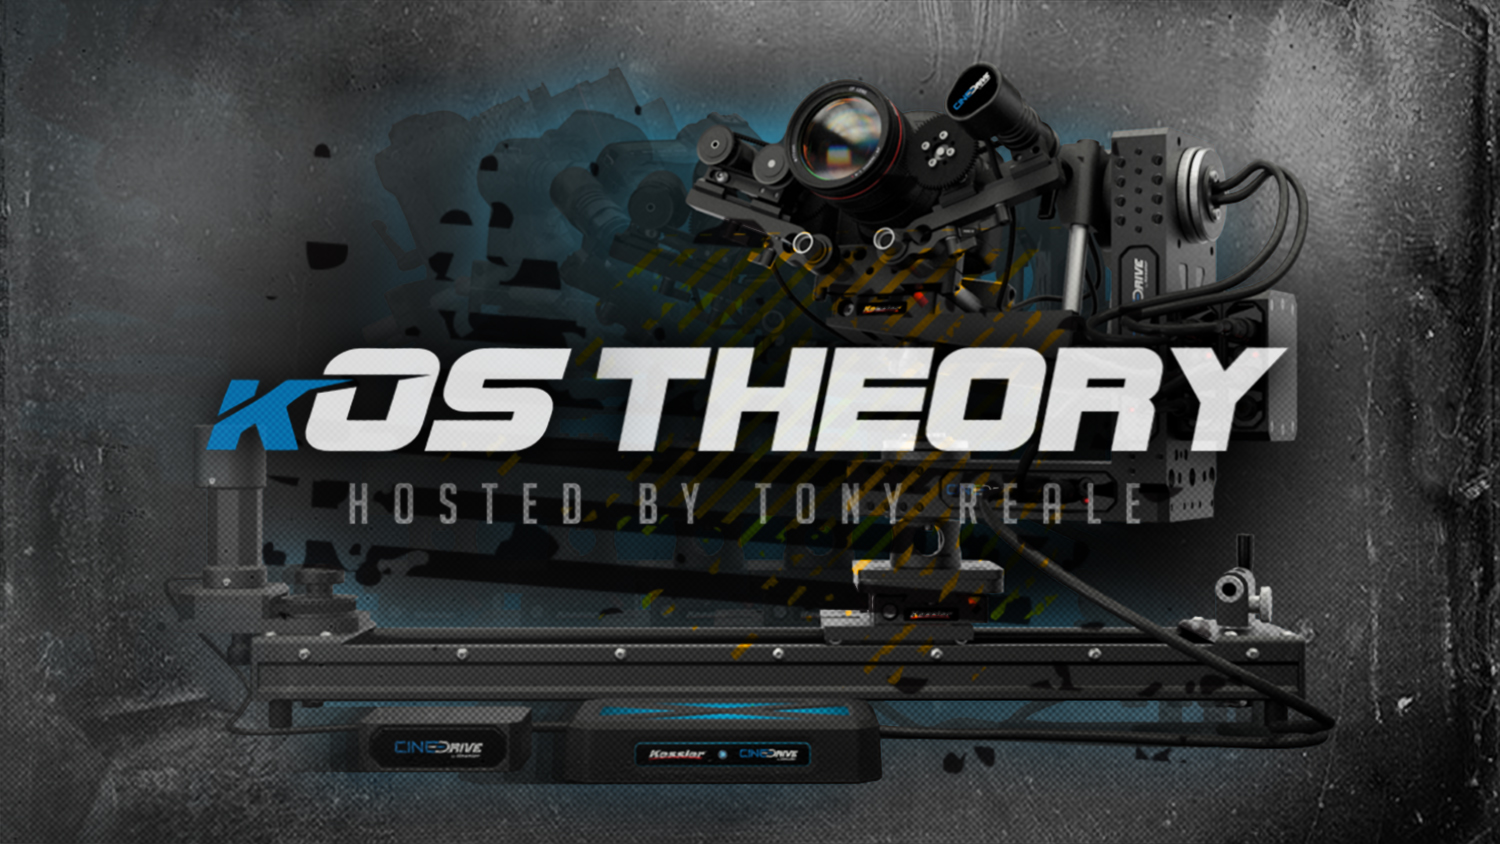 Check out our new series for Kessler Crane: kOS Theory